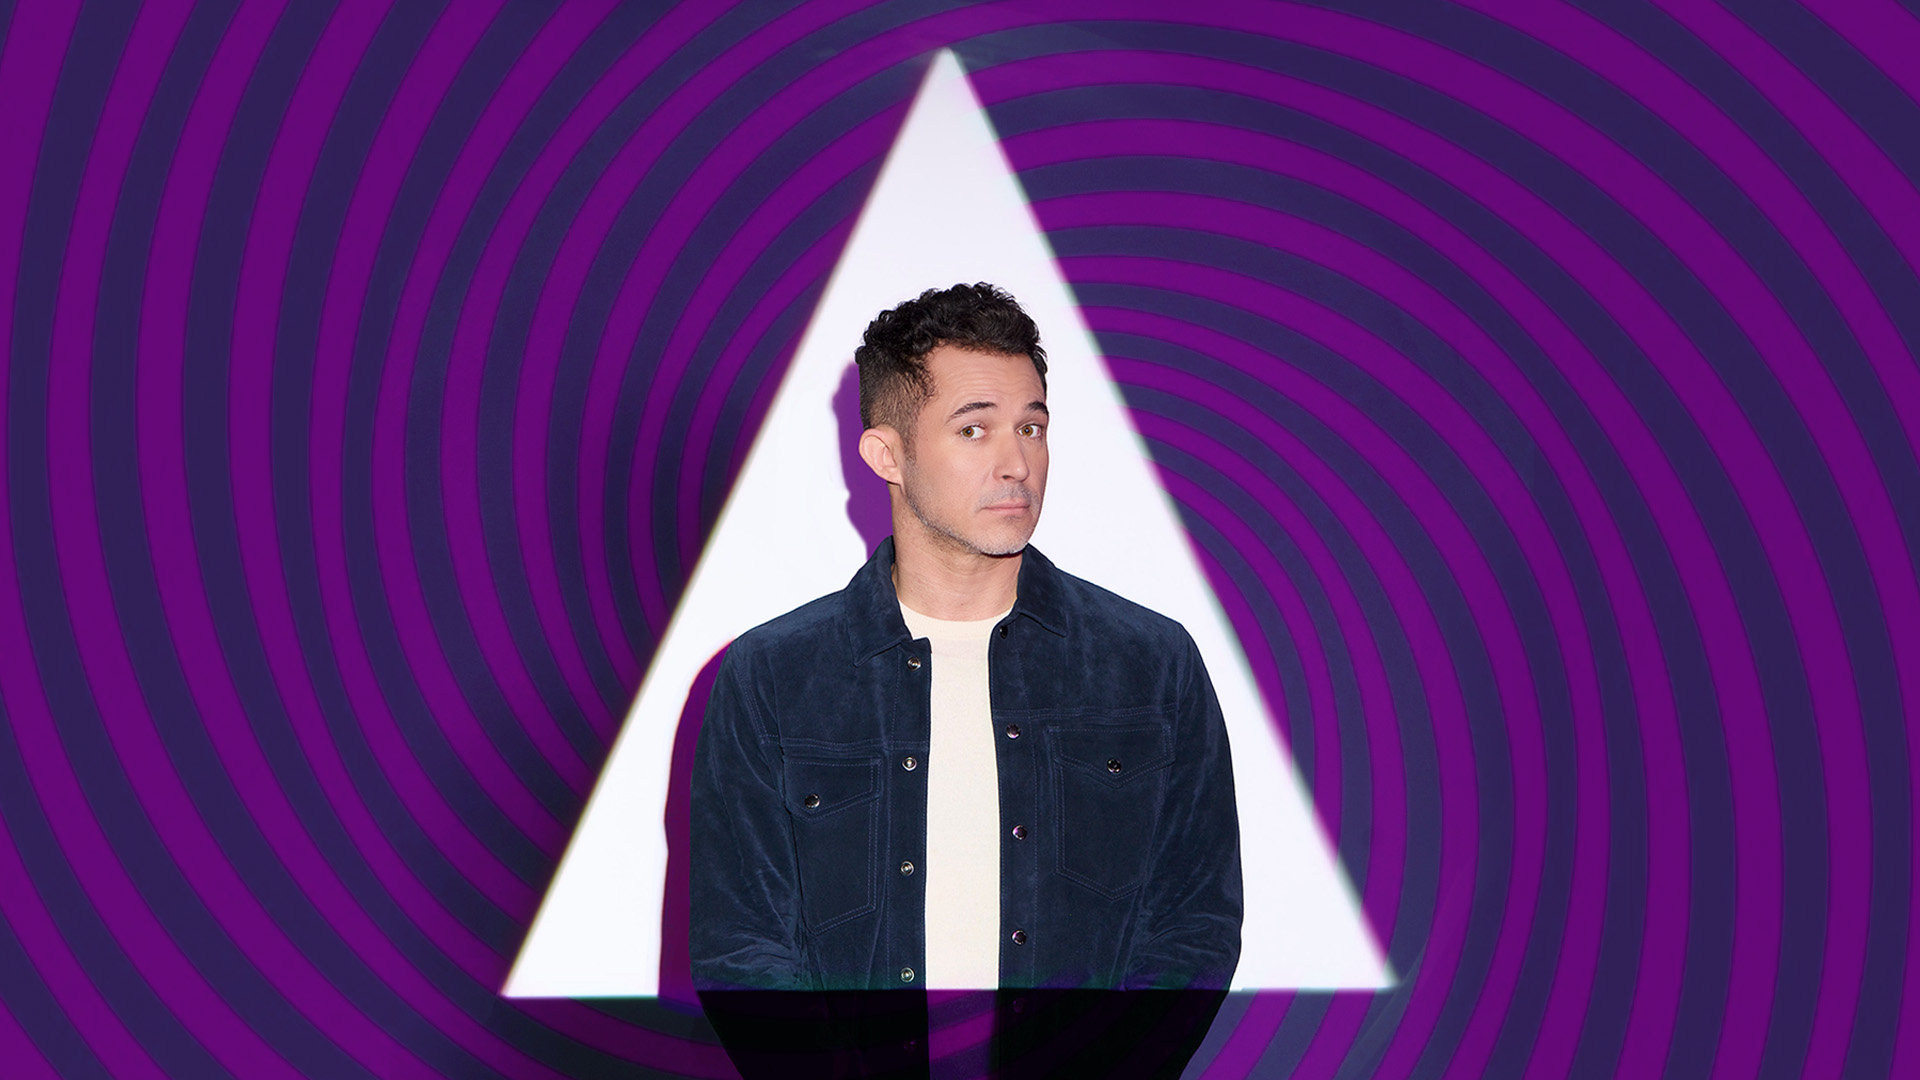 Justin Willman, a caucasian man with short brown hair and brown eyes wearing a white shirt and an open blue button up shirt. He is enclosed in a white triangle and the background is a spiral of purple and blue colors.